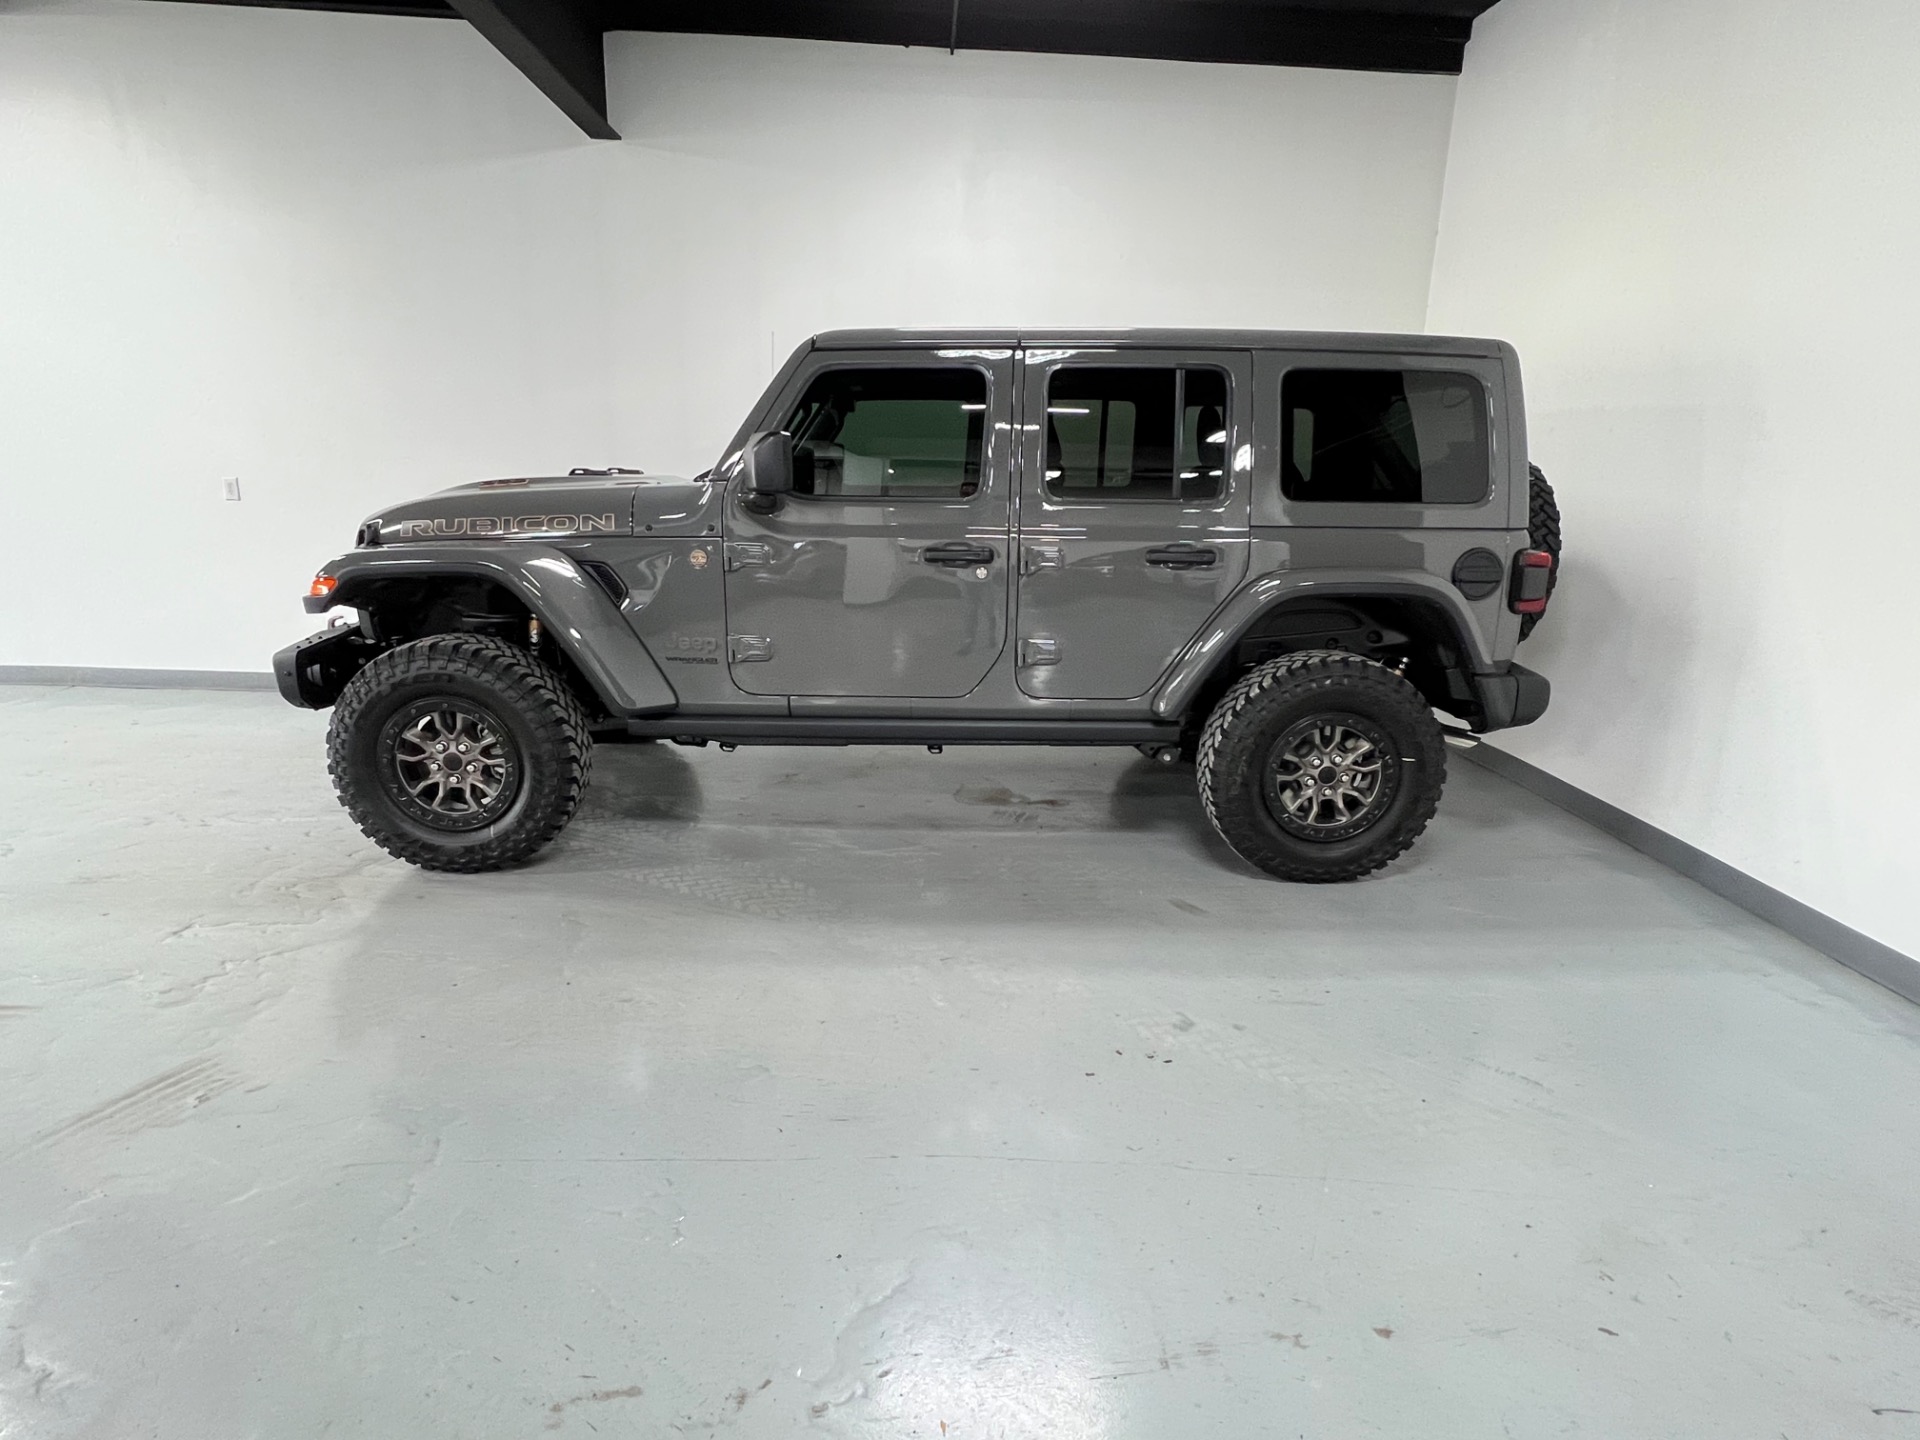 Used 2022 Sting-Gray Clear Coat Jeep Wrangler Unlimited RUBICON 392 4X4  470-hp v8 Rubicon 392 For Sale (Sold) | Prime Motorz Stock #3805